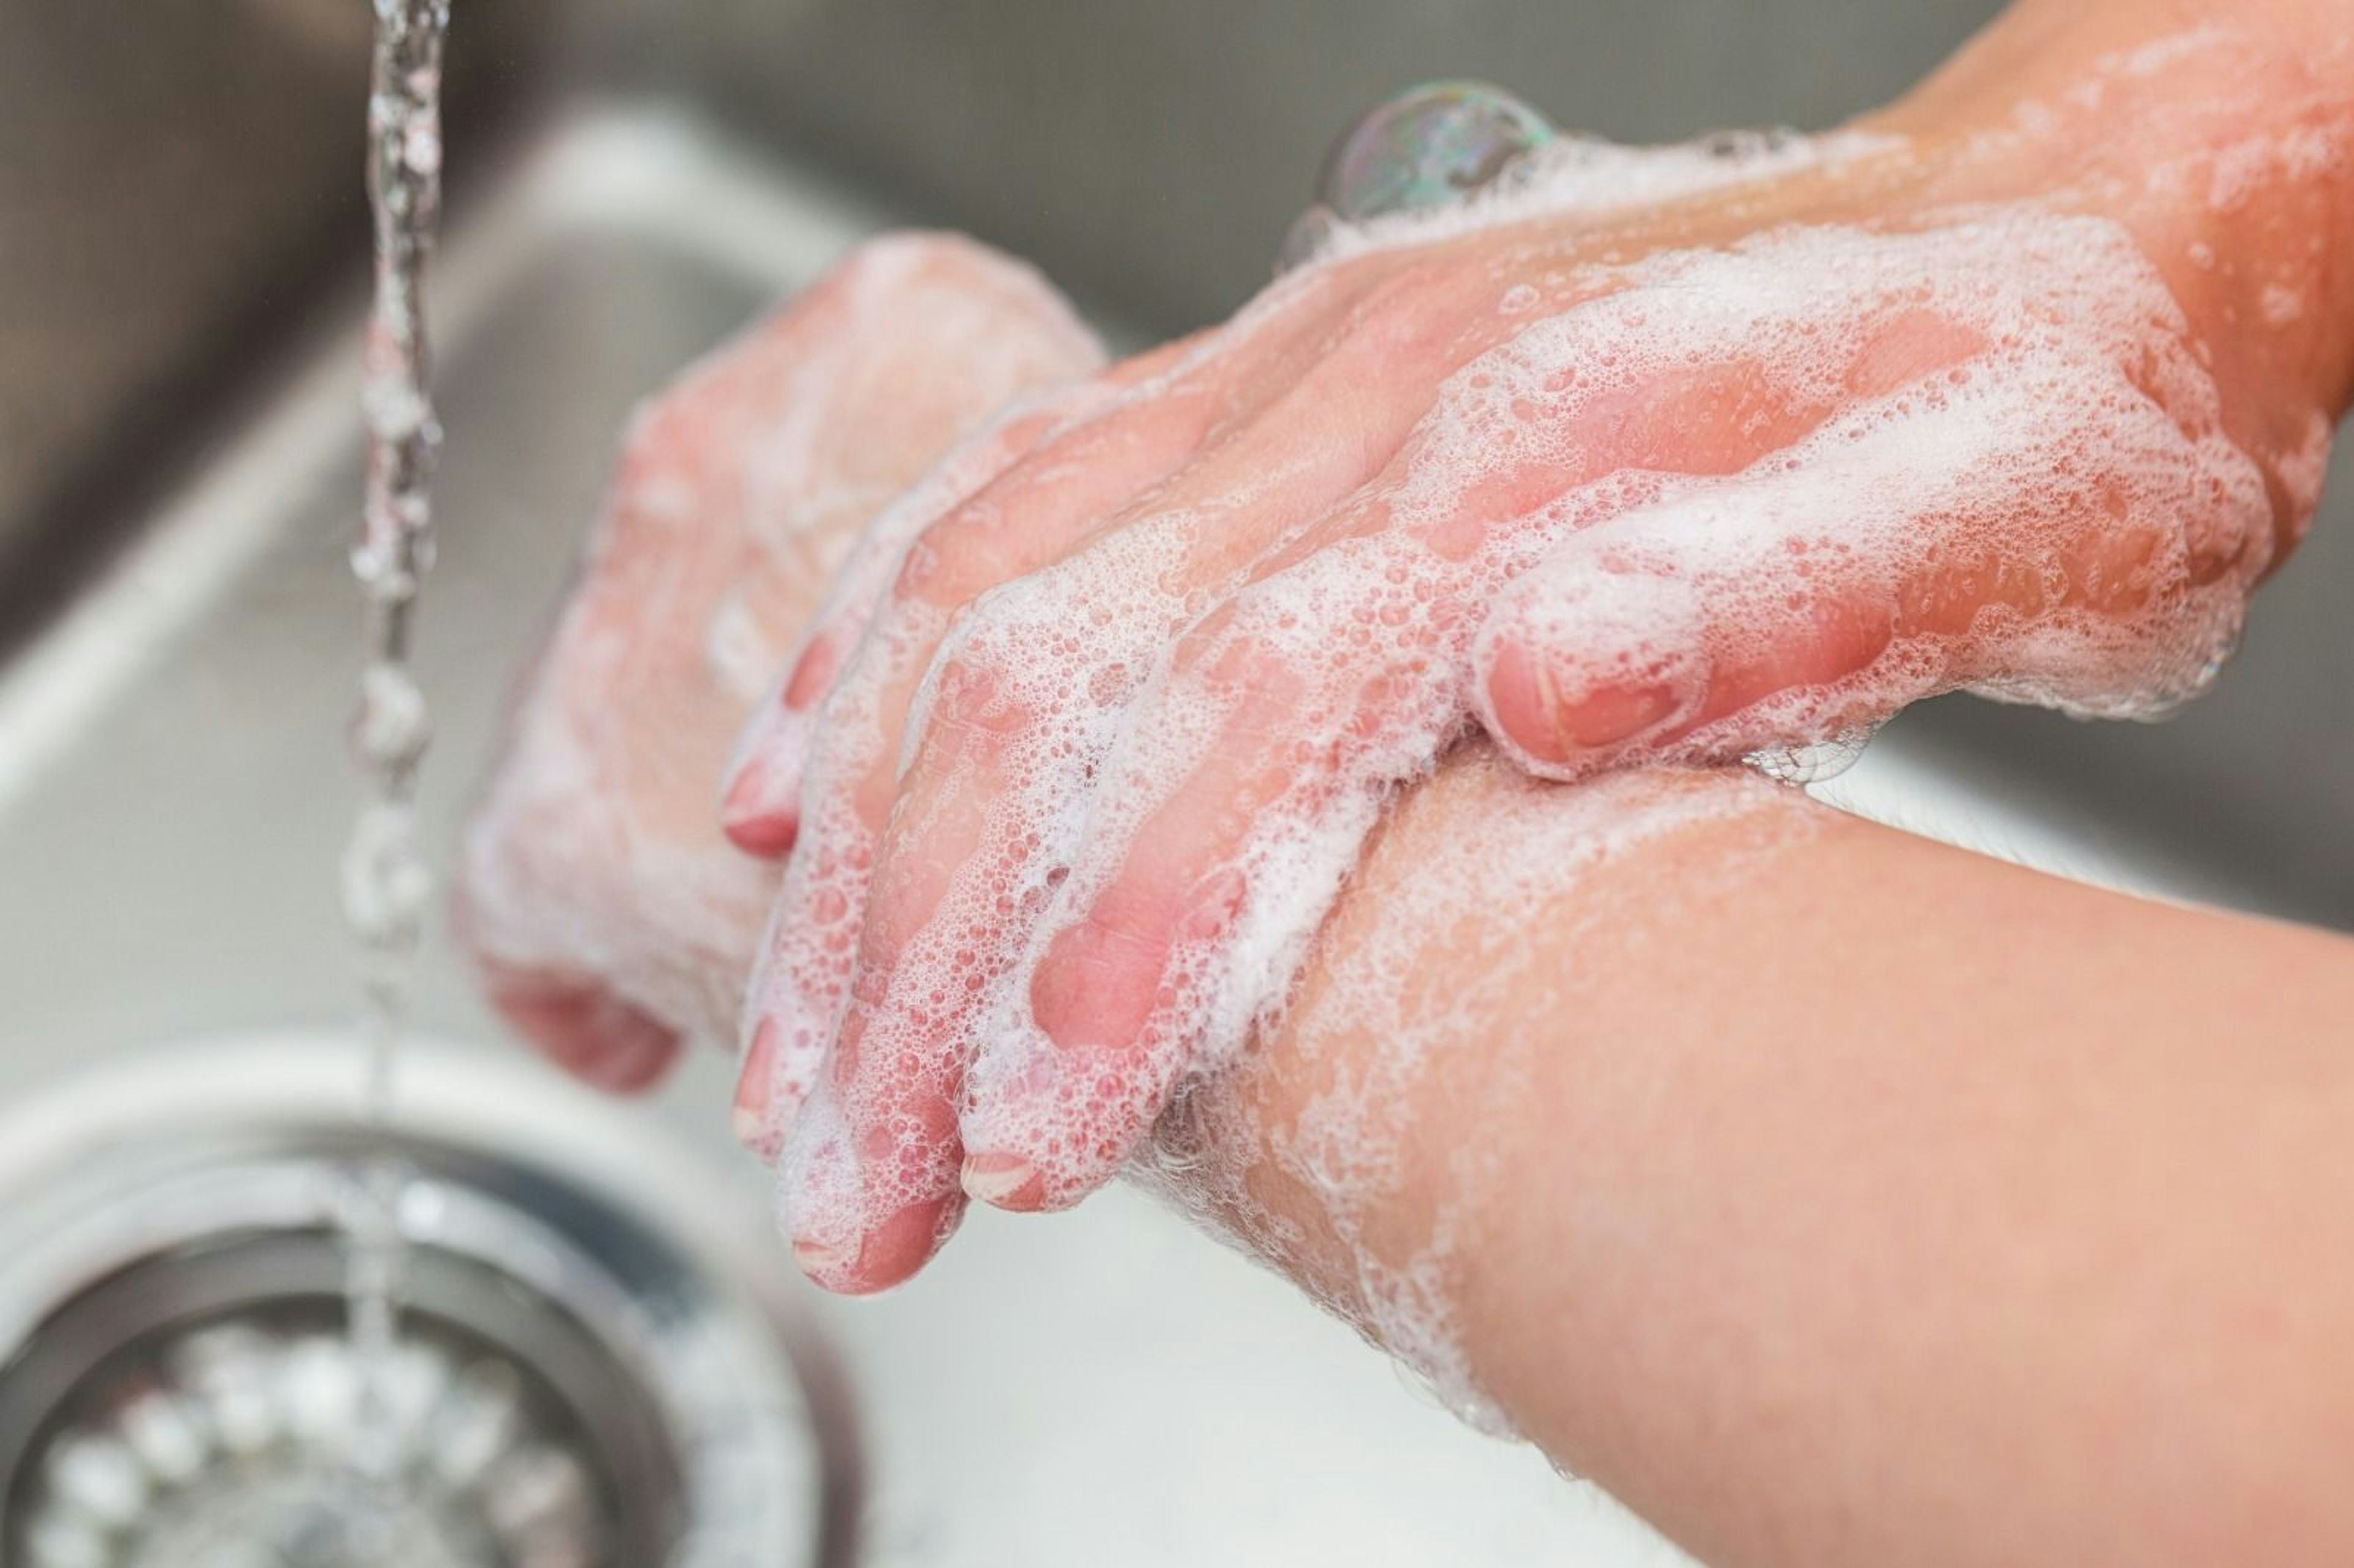 5 steps to establishing an effective infection control plan within a care home.